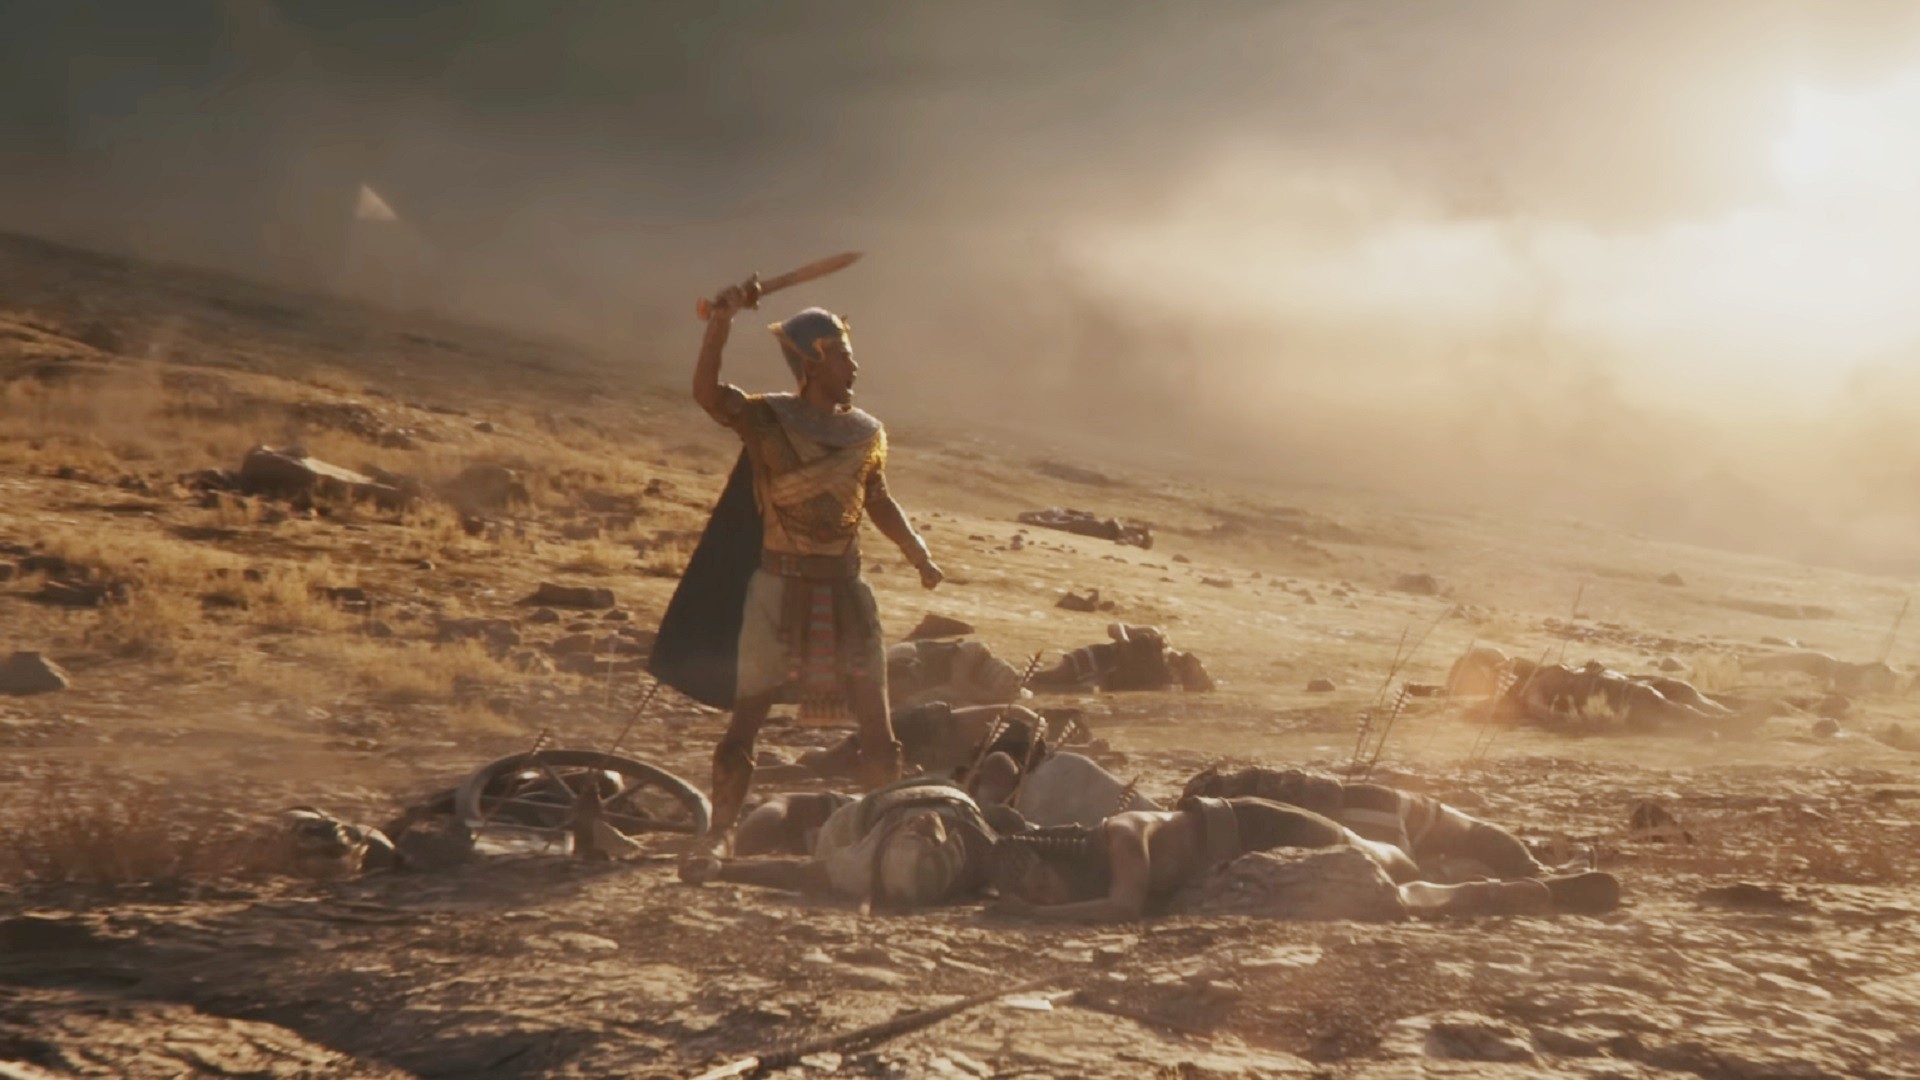 Total War Pharaoh release date, trailer, and setting